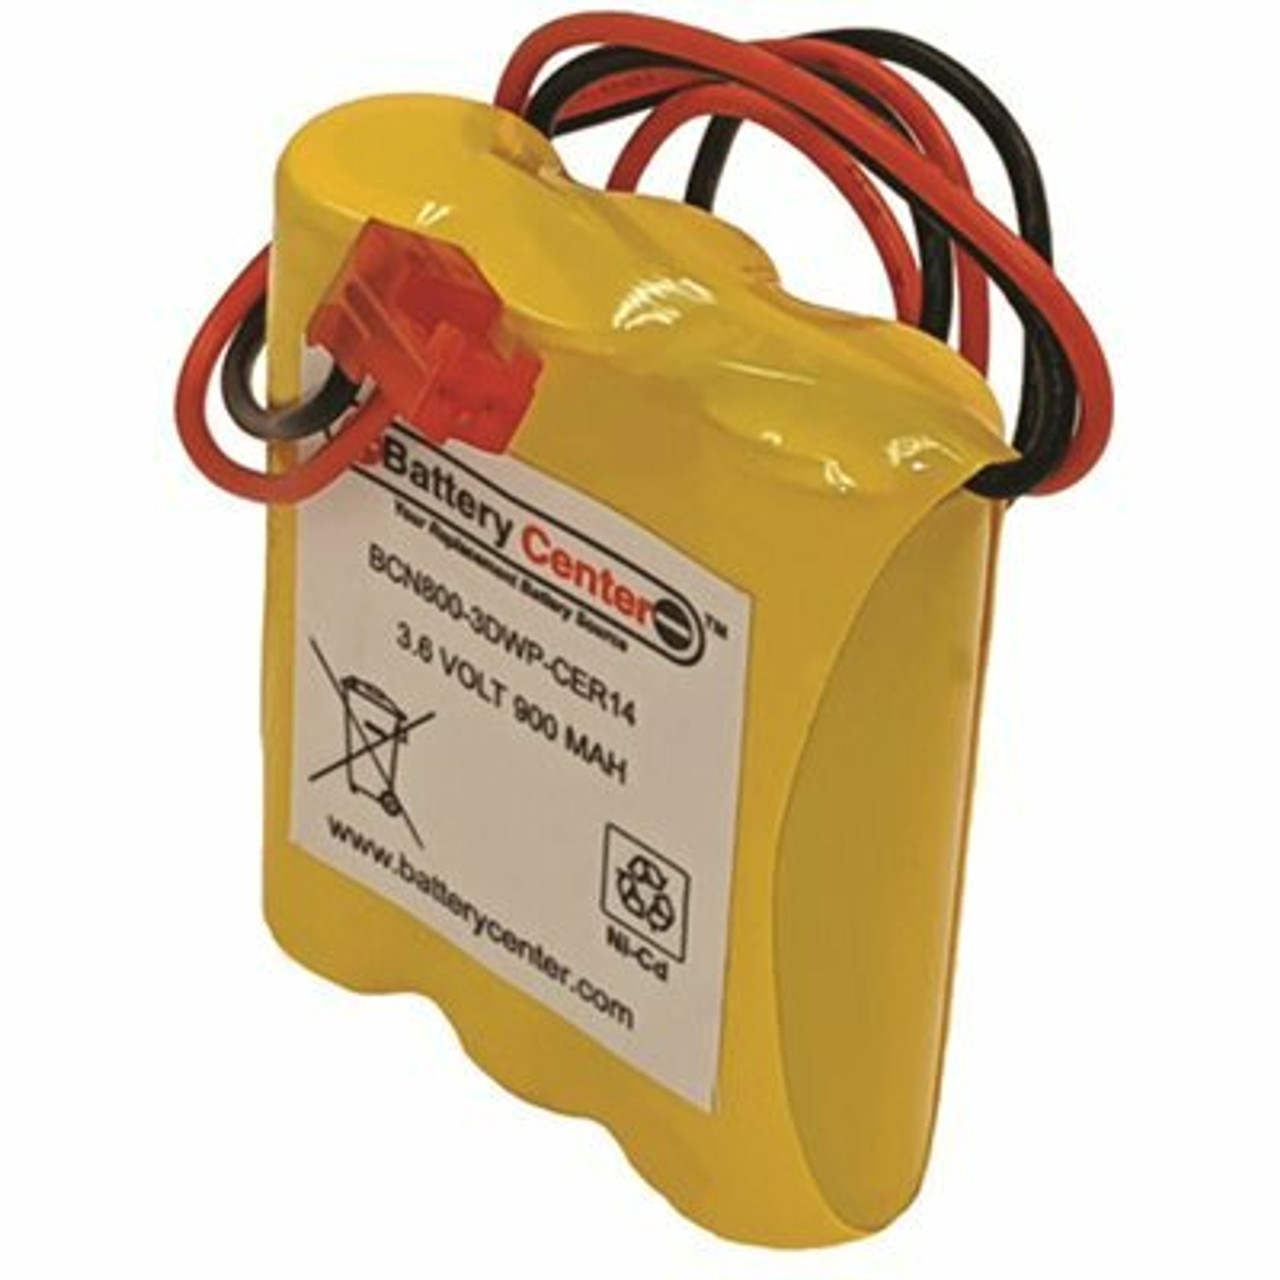 3.6-Volt 900 Mah Replacement For The Ebe-93 Nickel Cadmium Emergency Lighting Battery (Rechargeable)